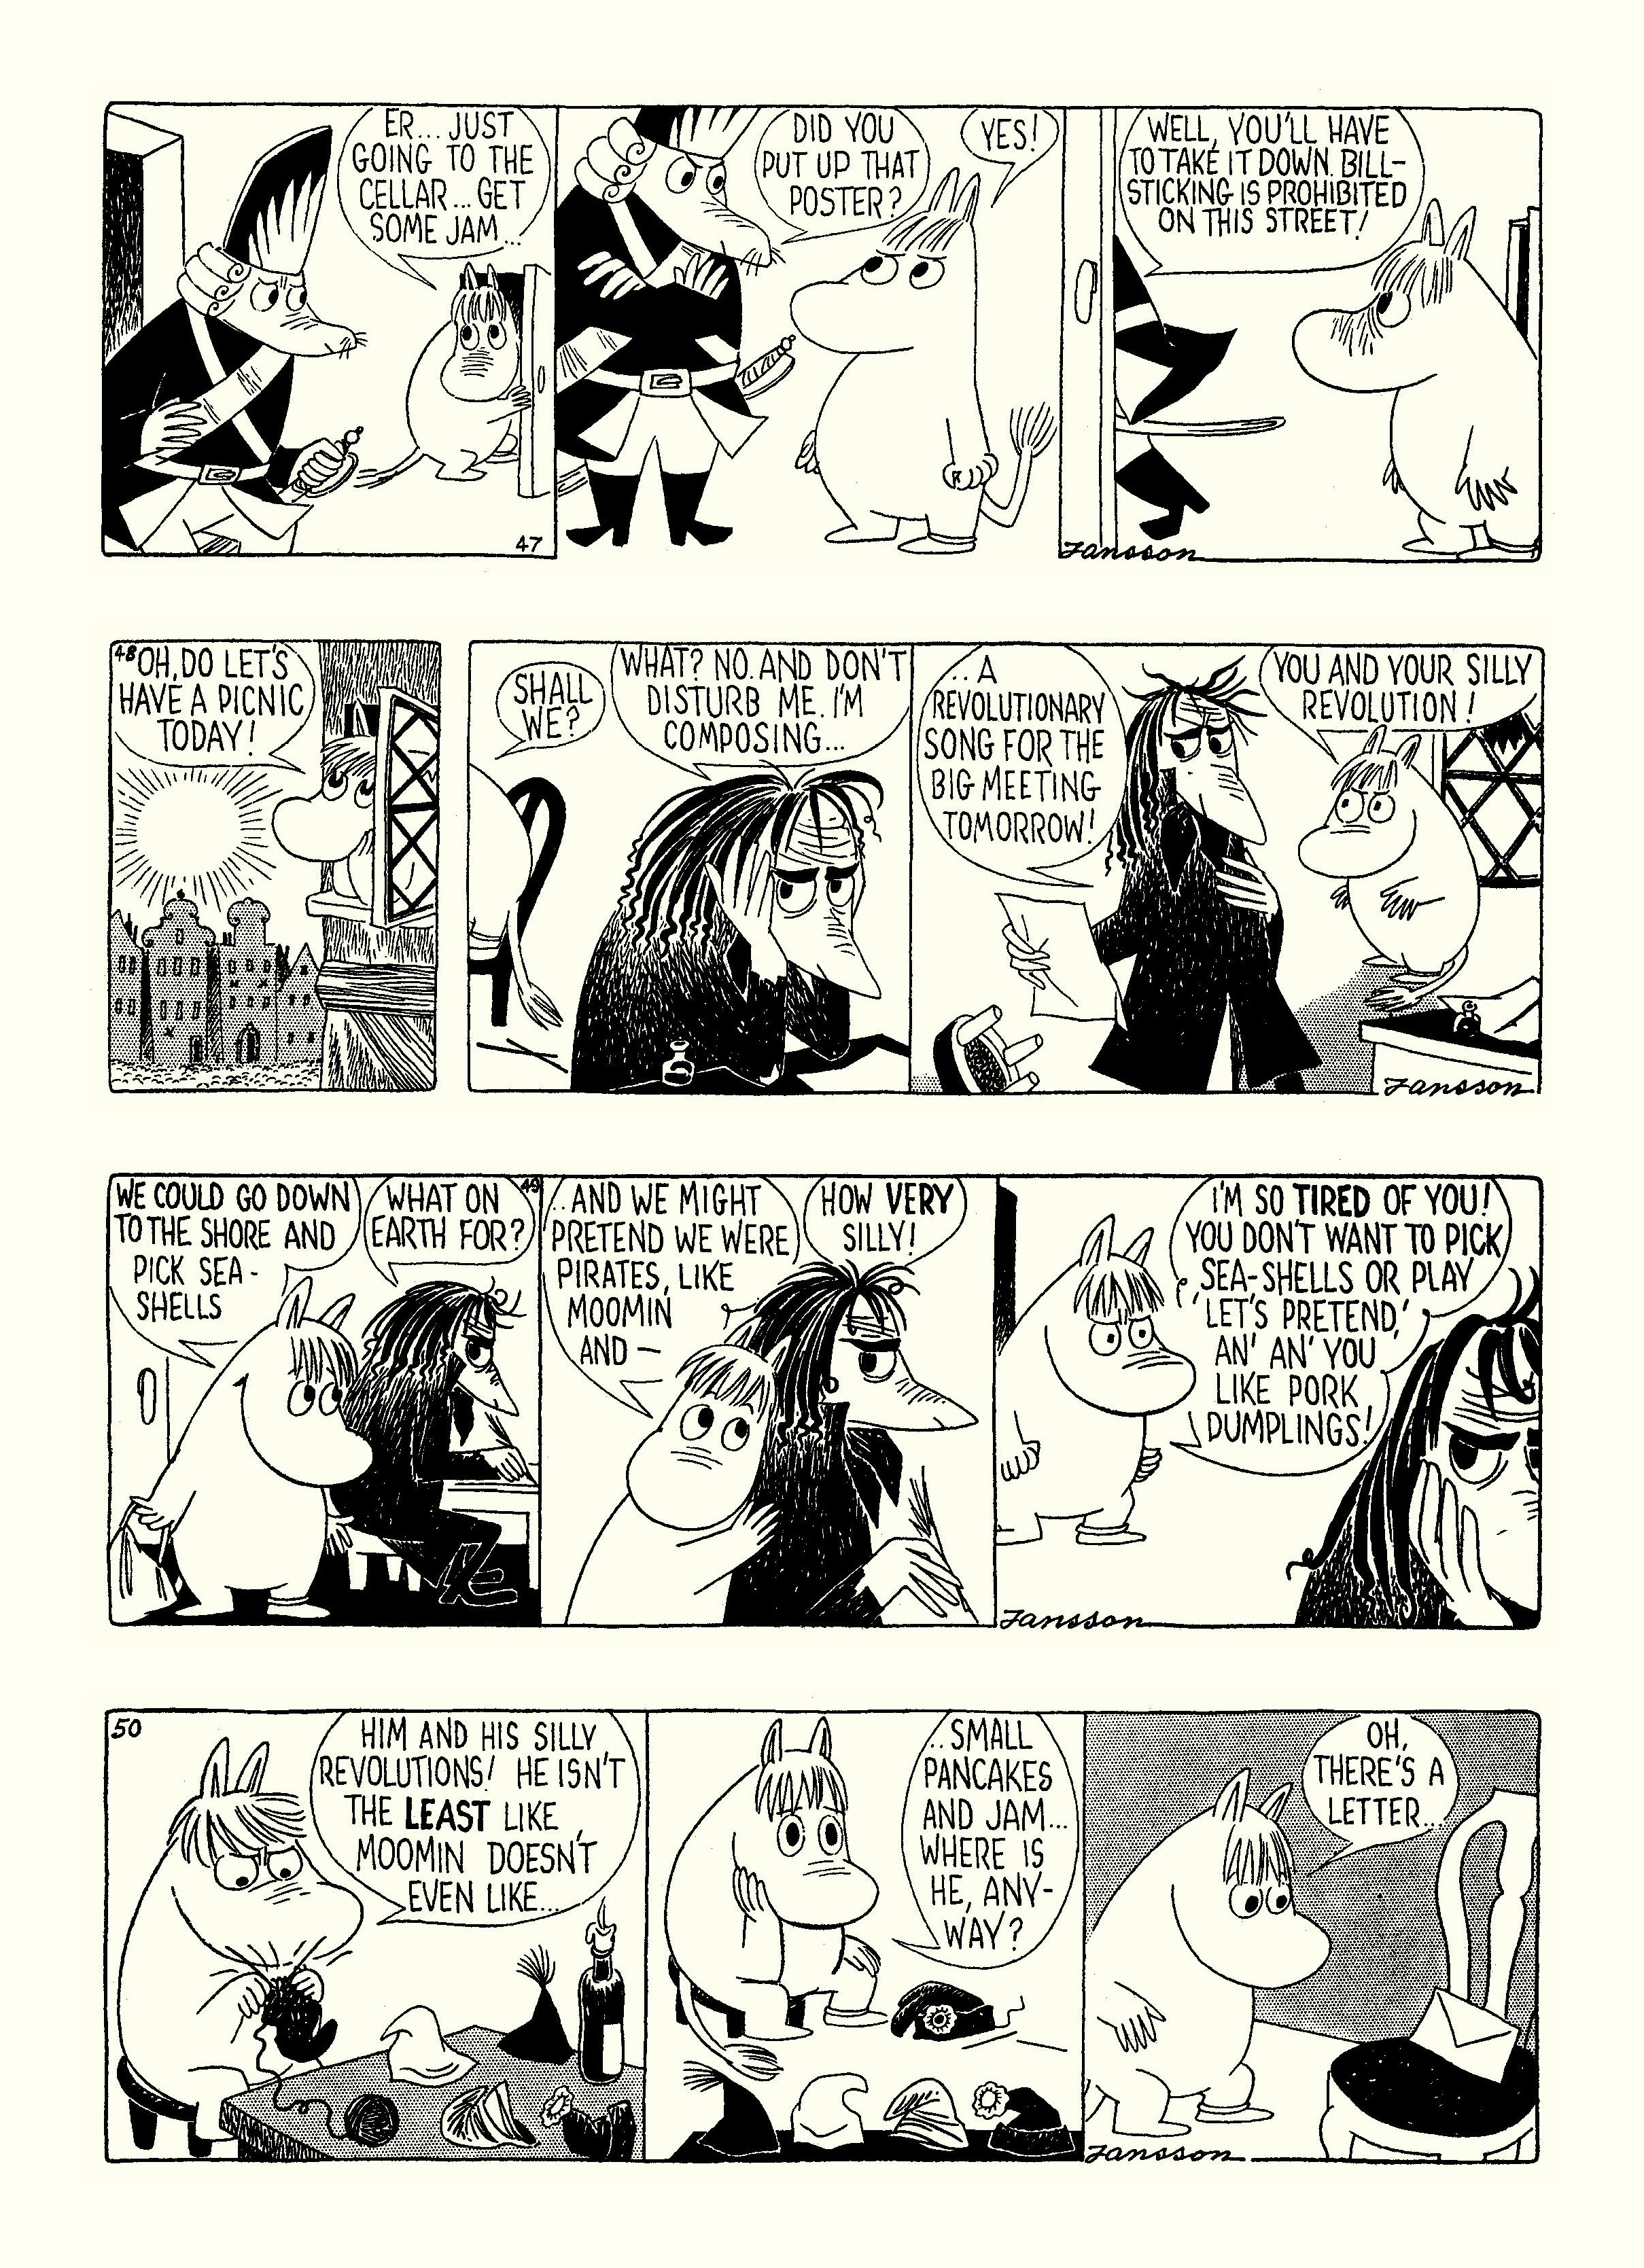 Read online Moomin: The Complete Tove Jansson Comic Strip comic -  Issue # TPB 4 - 35